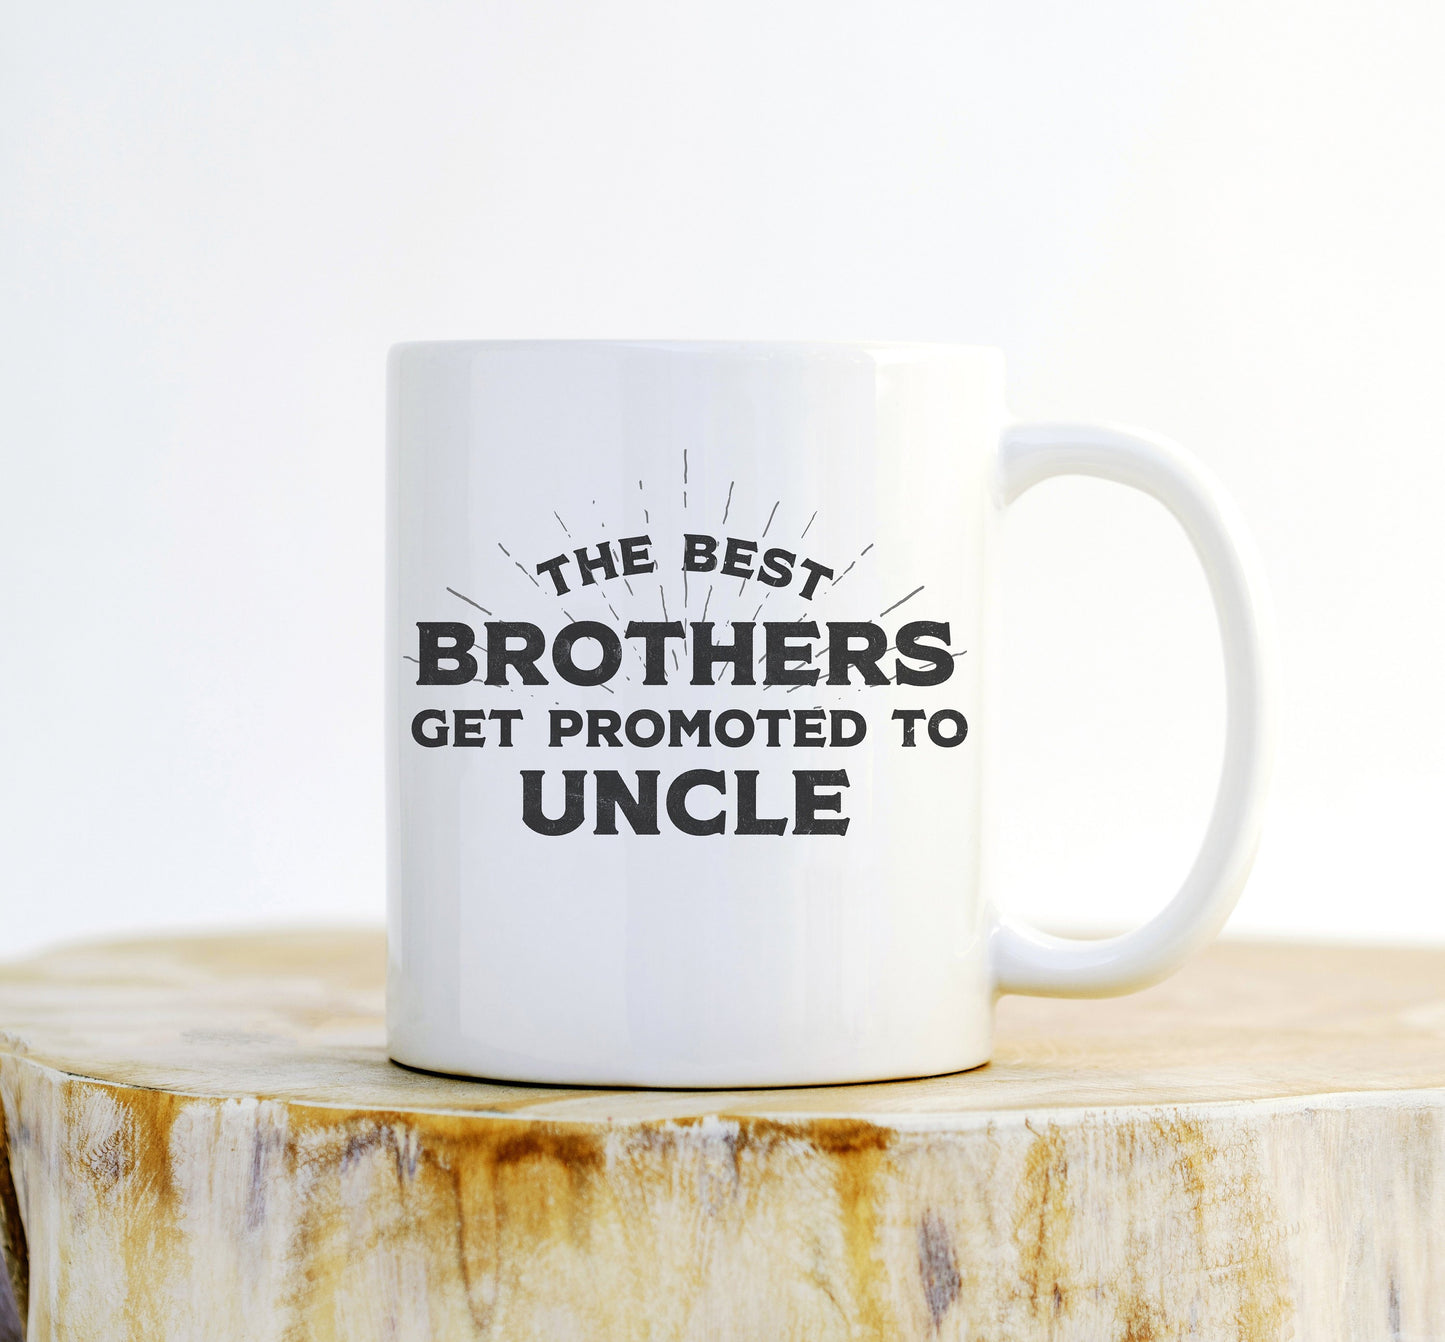 The Best Brothers Get Promoted To Uncle Mug - Uncle Gift, Brother Gift, New Uncle Gift, Uncle Announcement, Gender Reveal Ideas